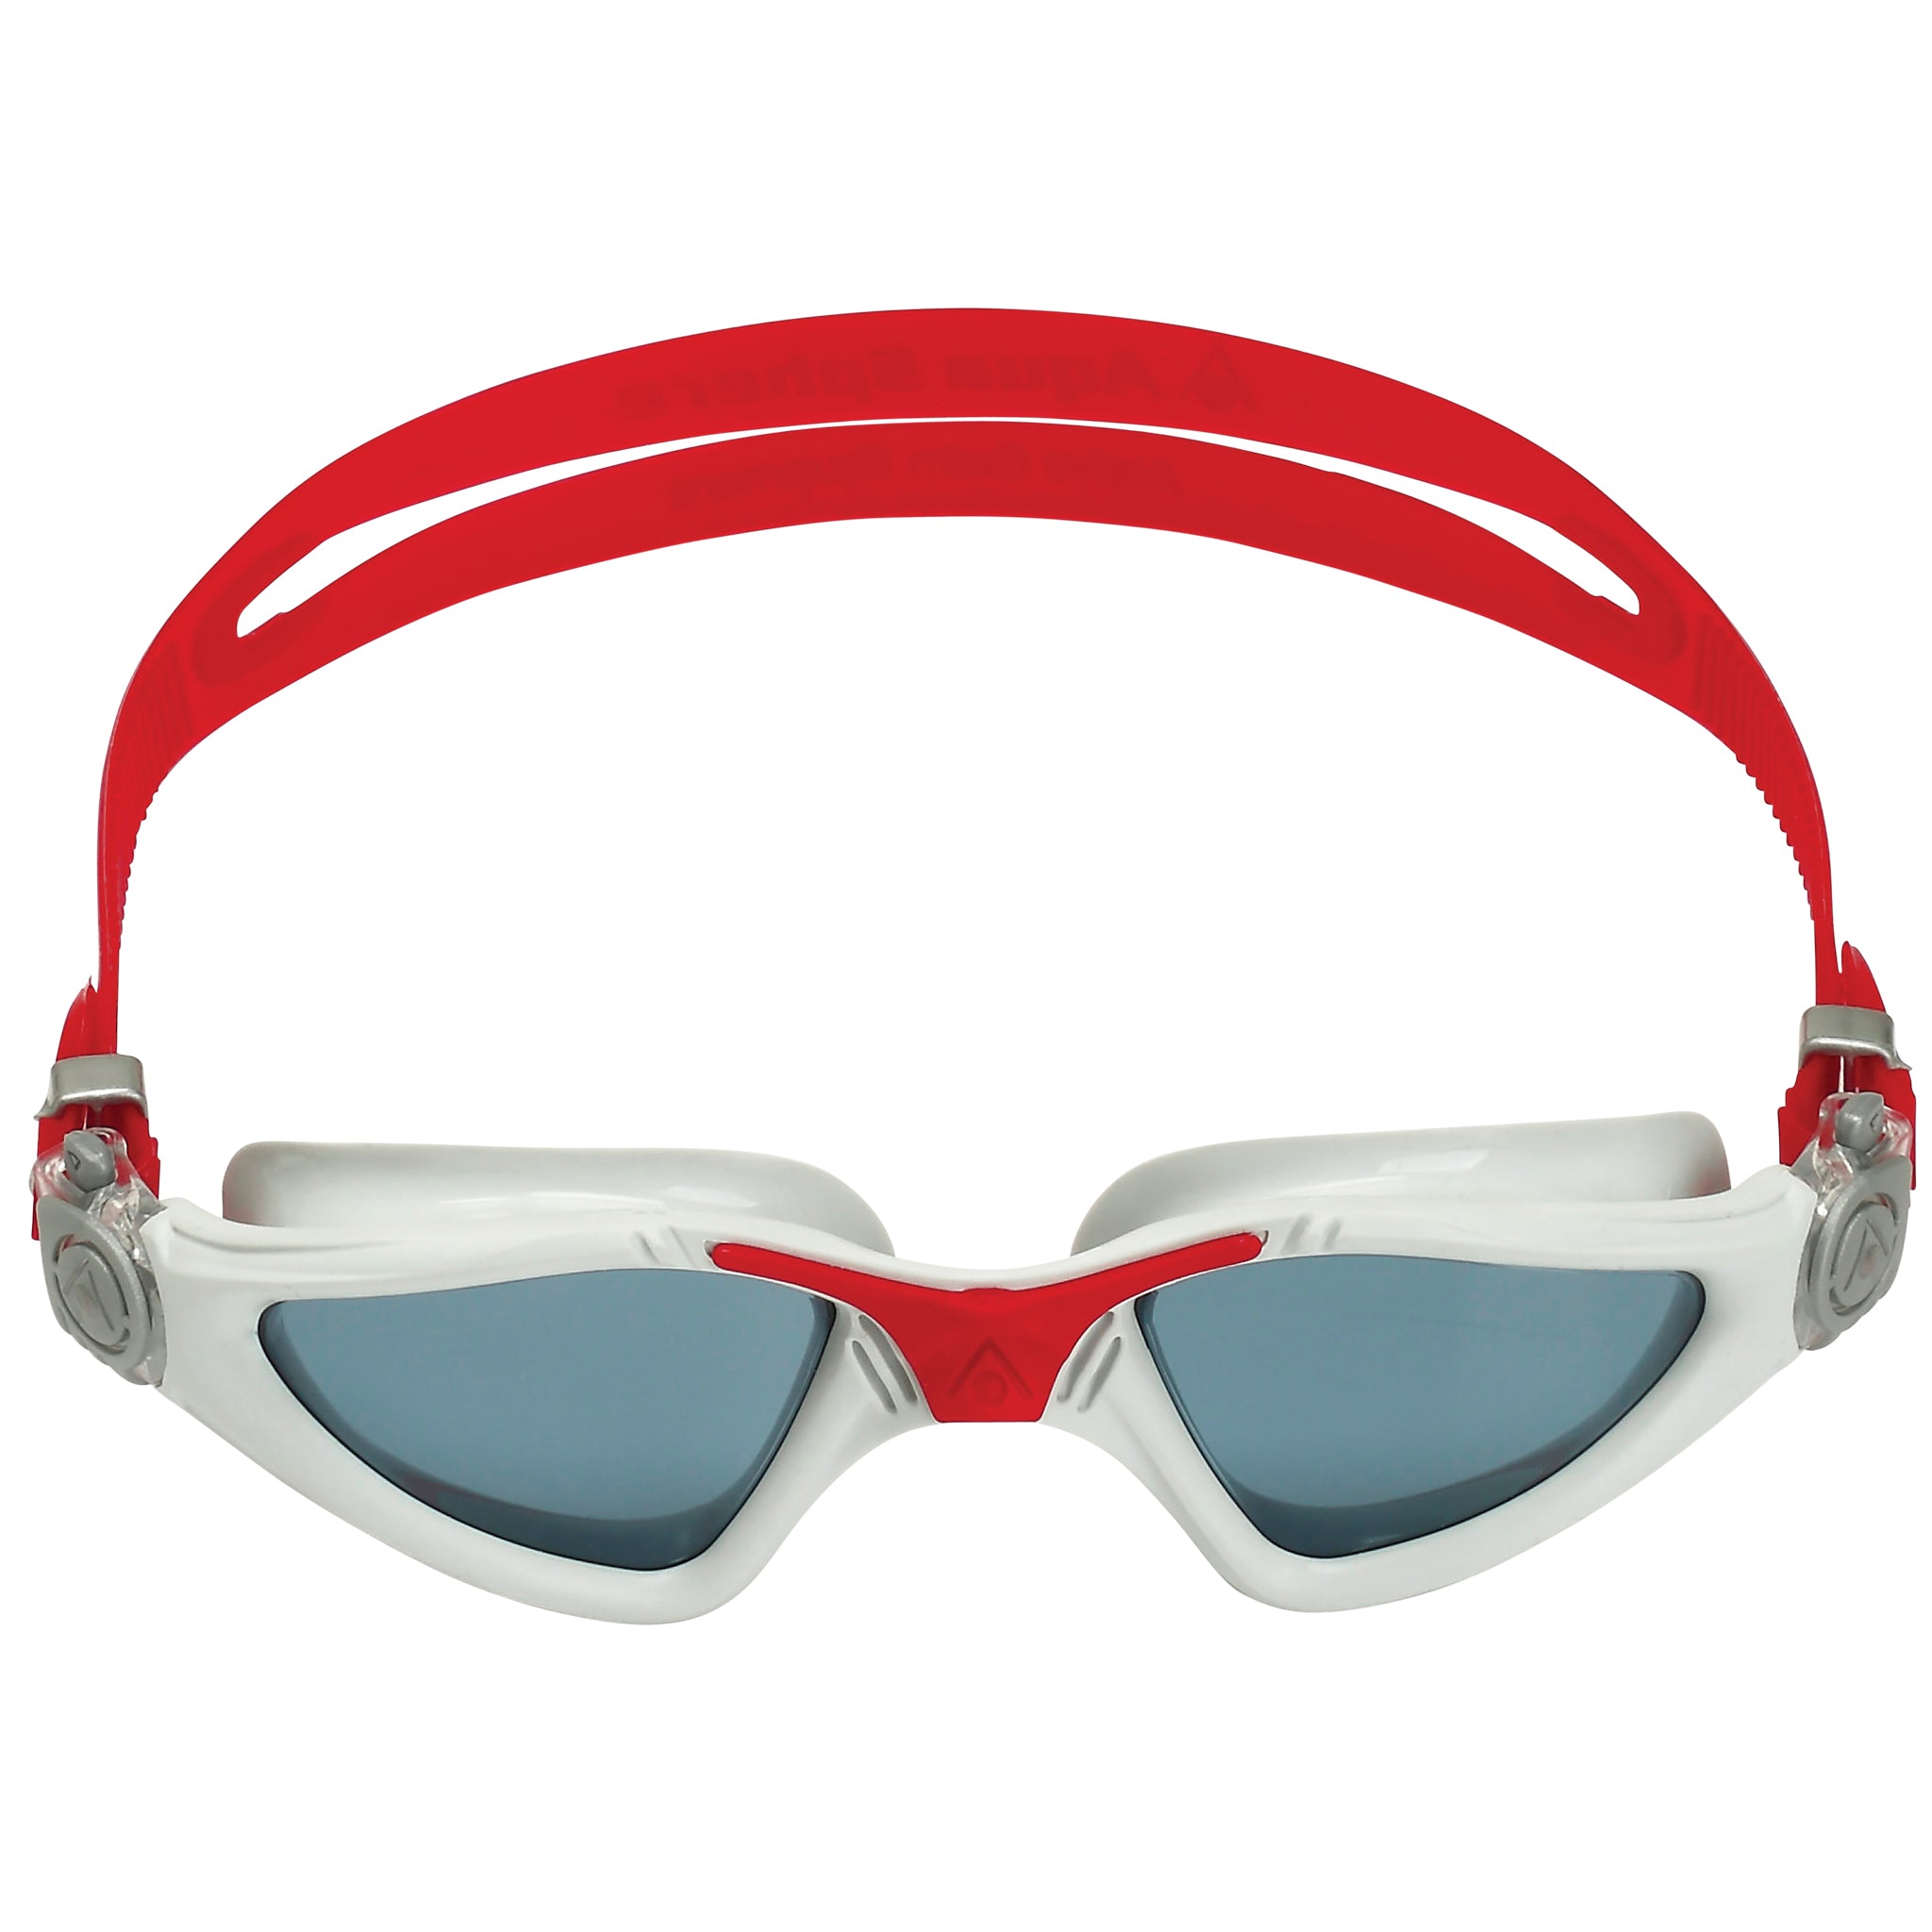 Aquasphere Kayenne Swimming Goggles Smoke Tinted Lenses | Grey/Red Frontt